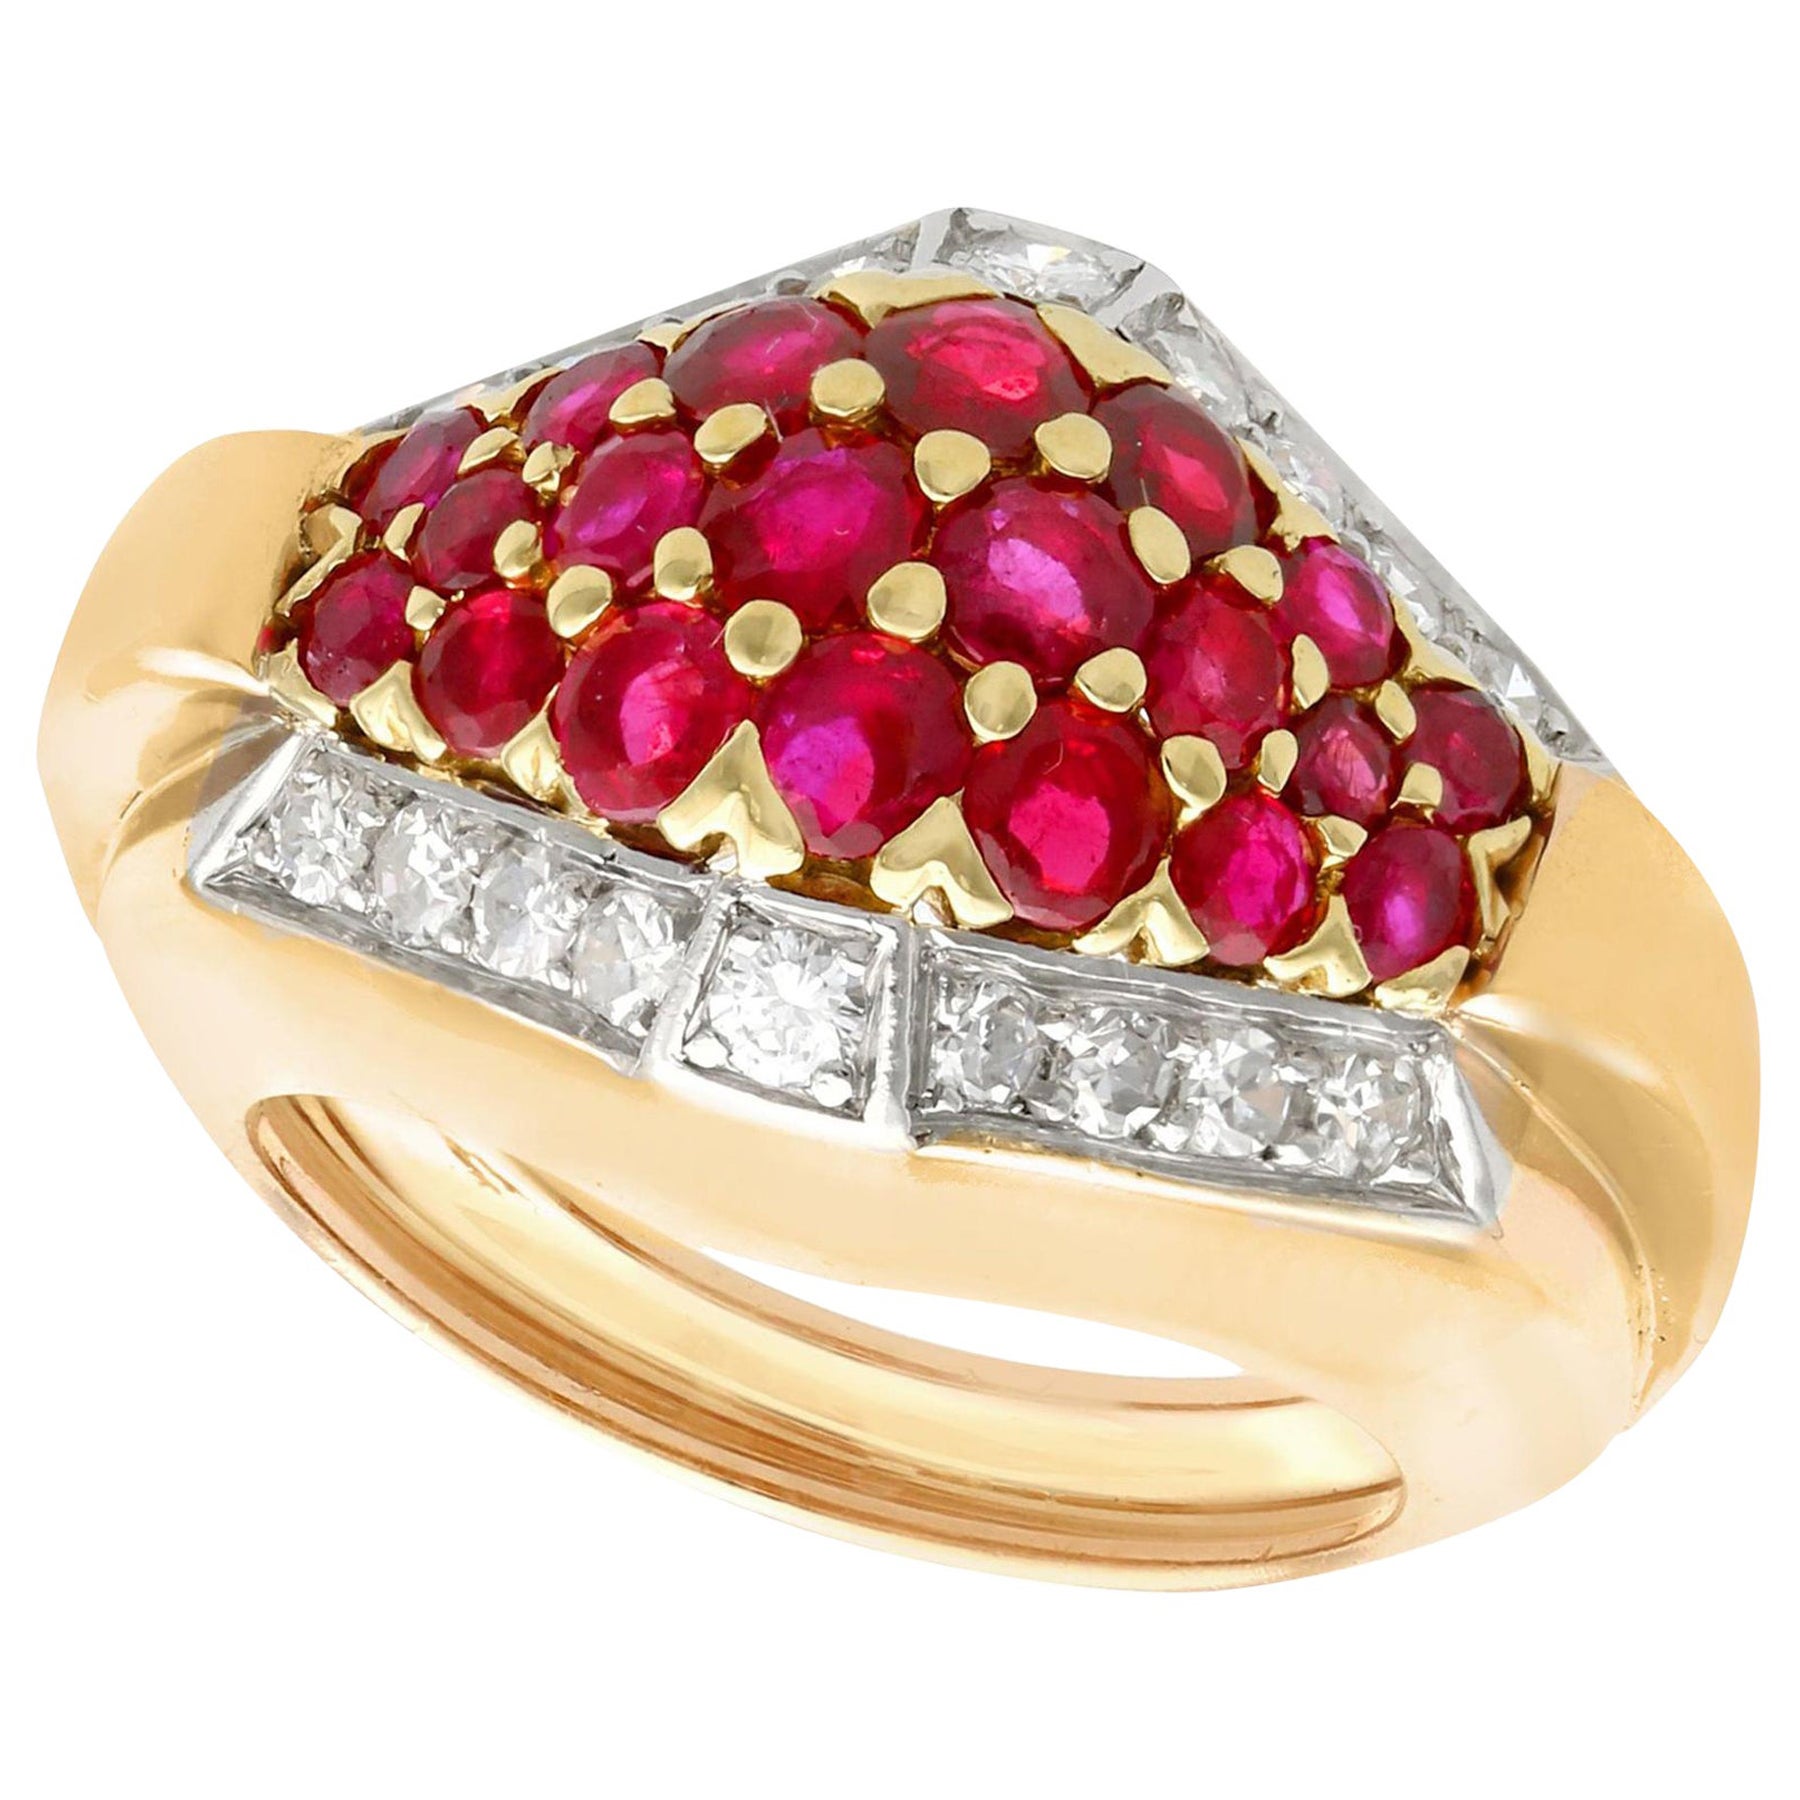 Vintage Art Deco Style 1950s Ruby Diamond Yellow Gold Cocktail Ring